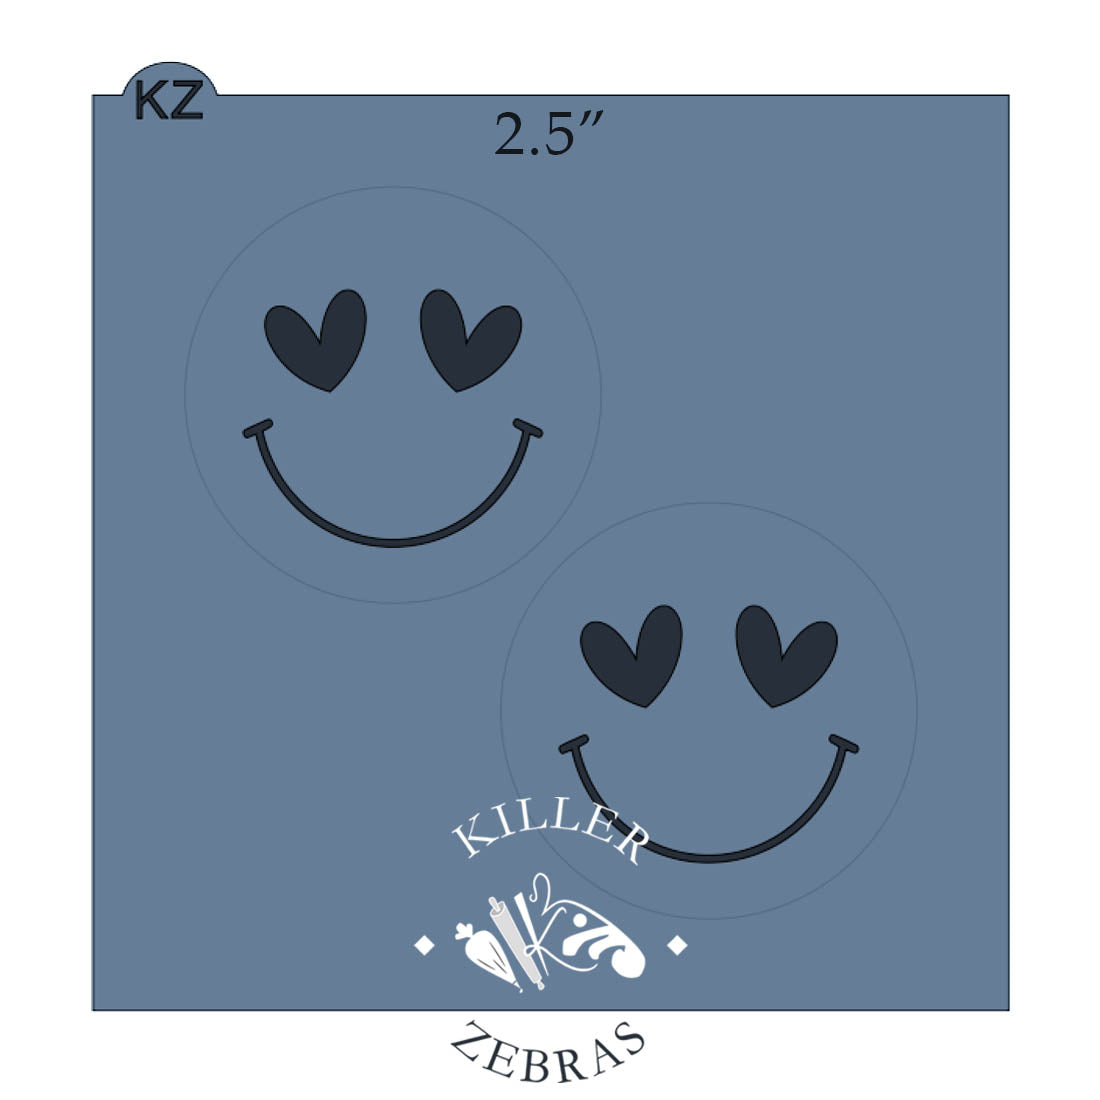 Emoji Heart Eyes Stencil Template - Reusable Stencils for Painting in Small  & Large Sizes - Yahoo Shopping